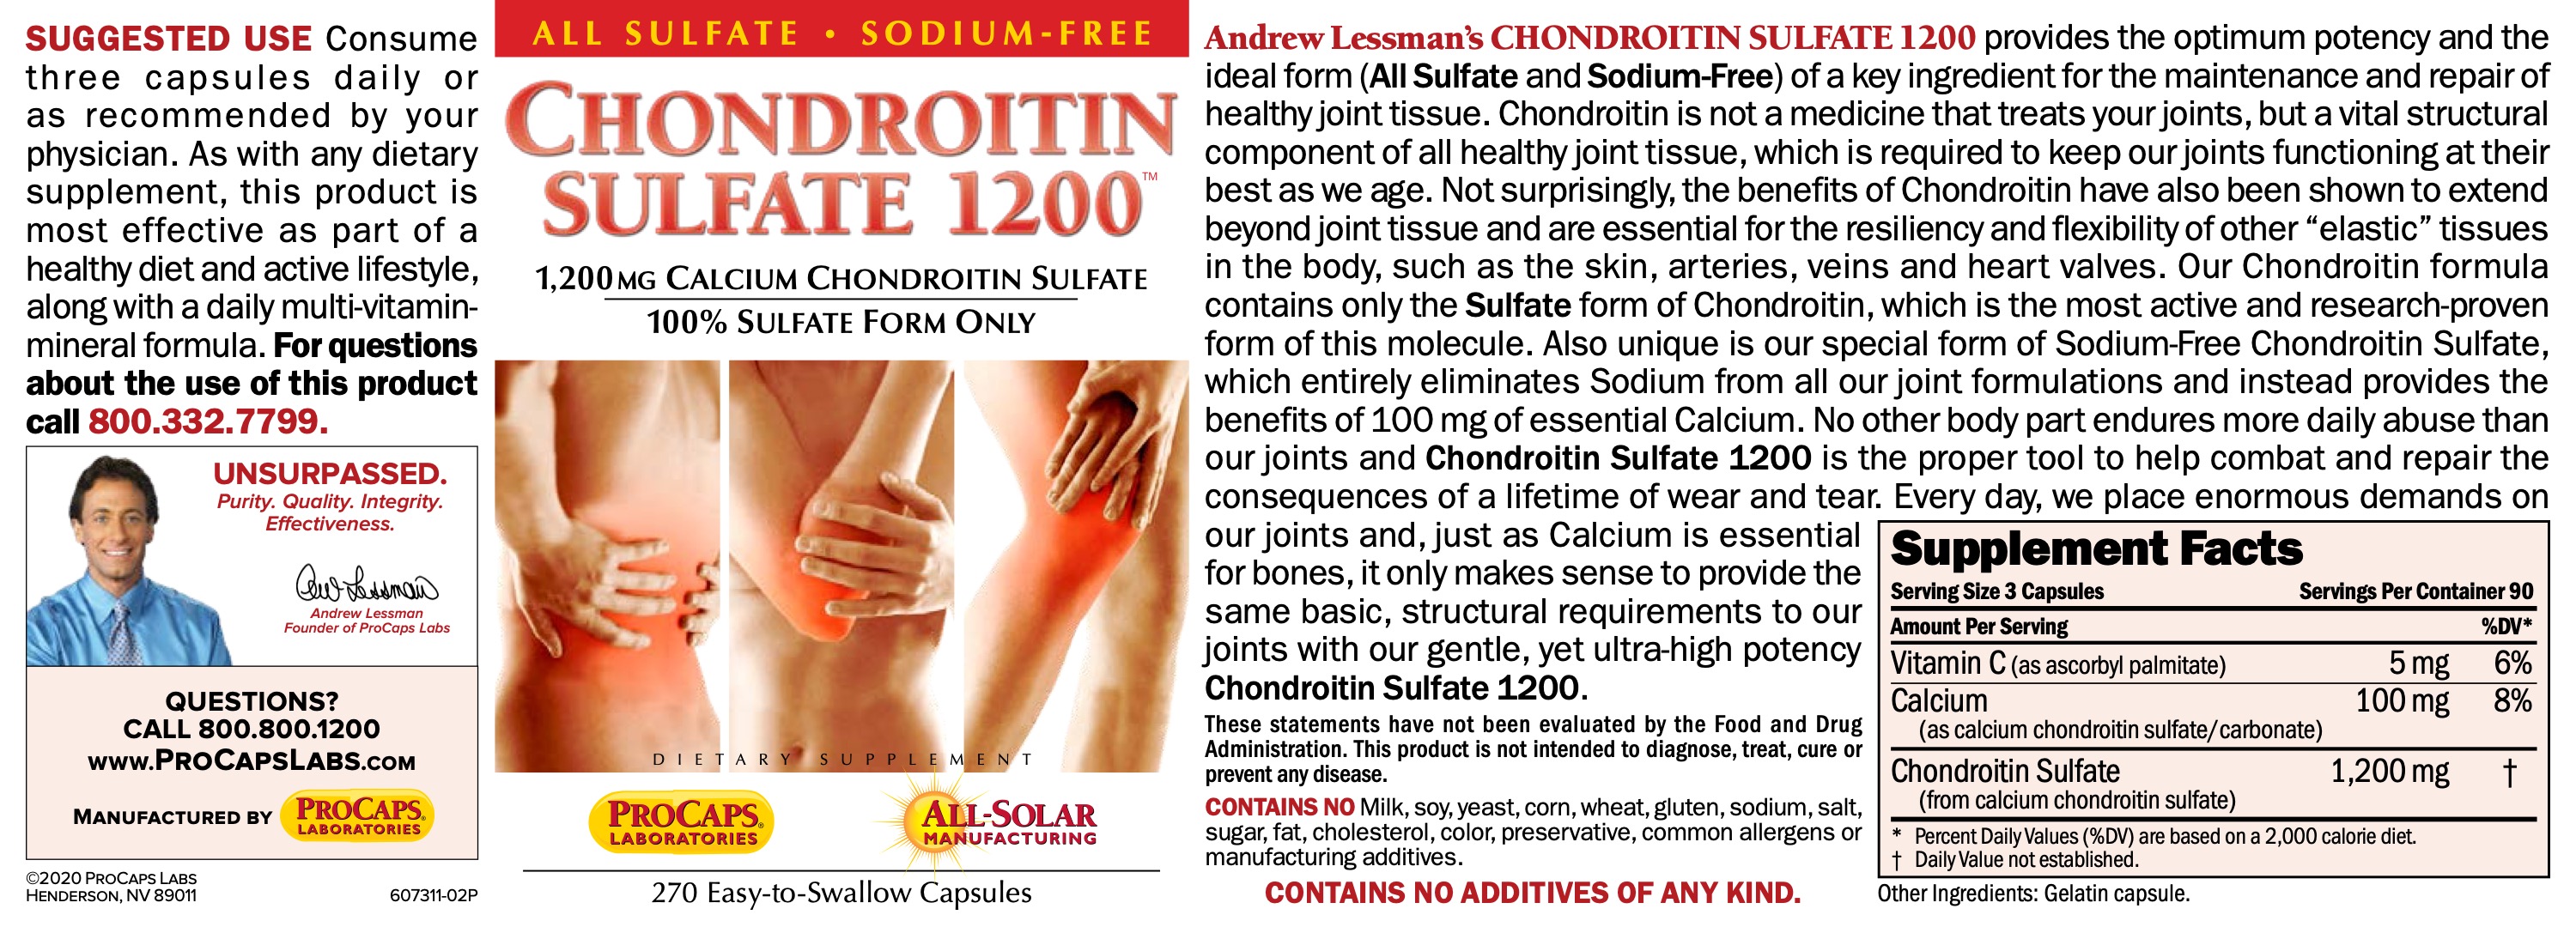 Chondroitin-Sulfate-1200-Capsules-Joint-Support